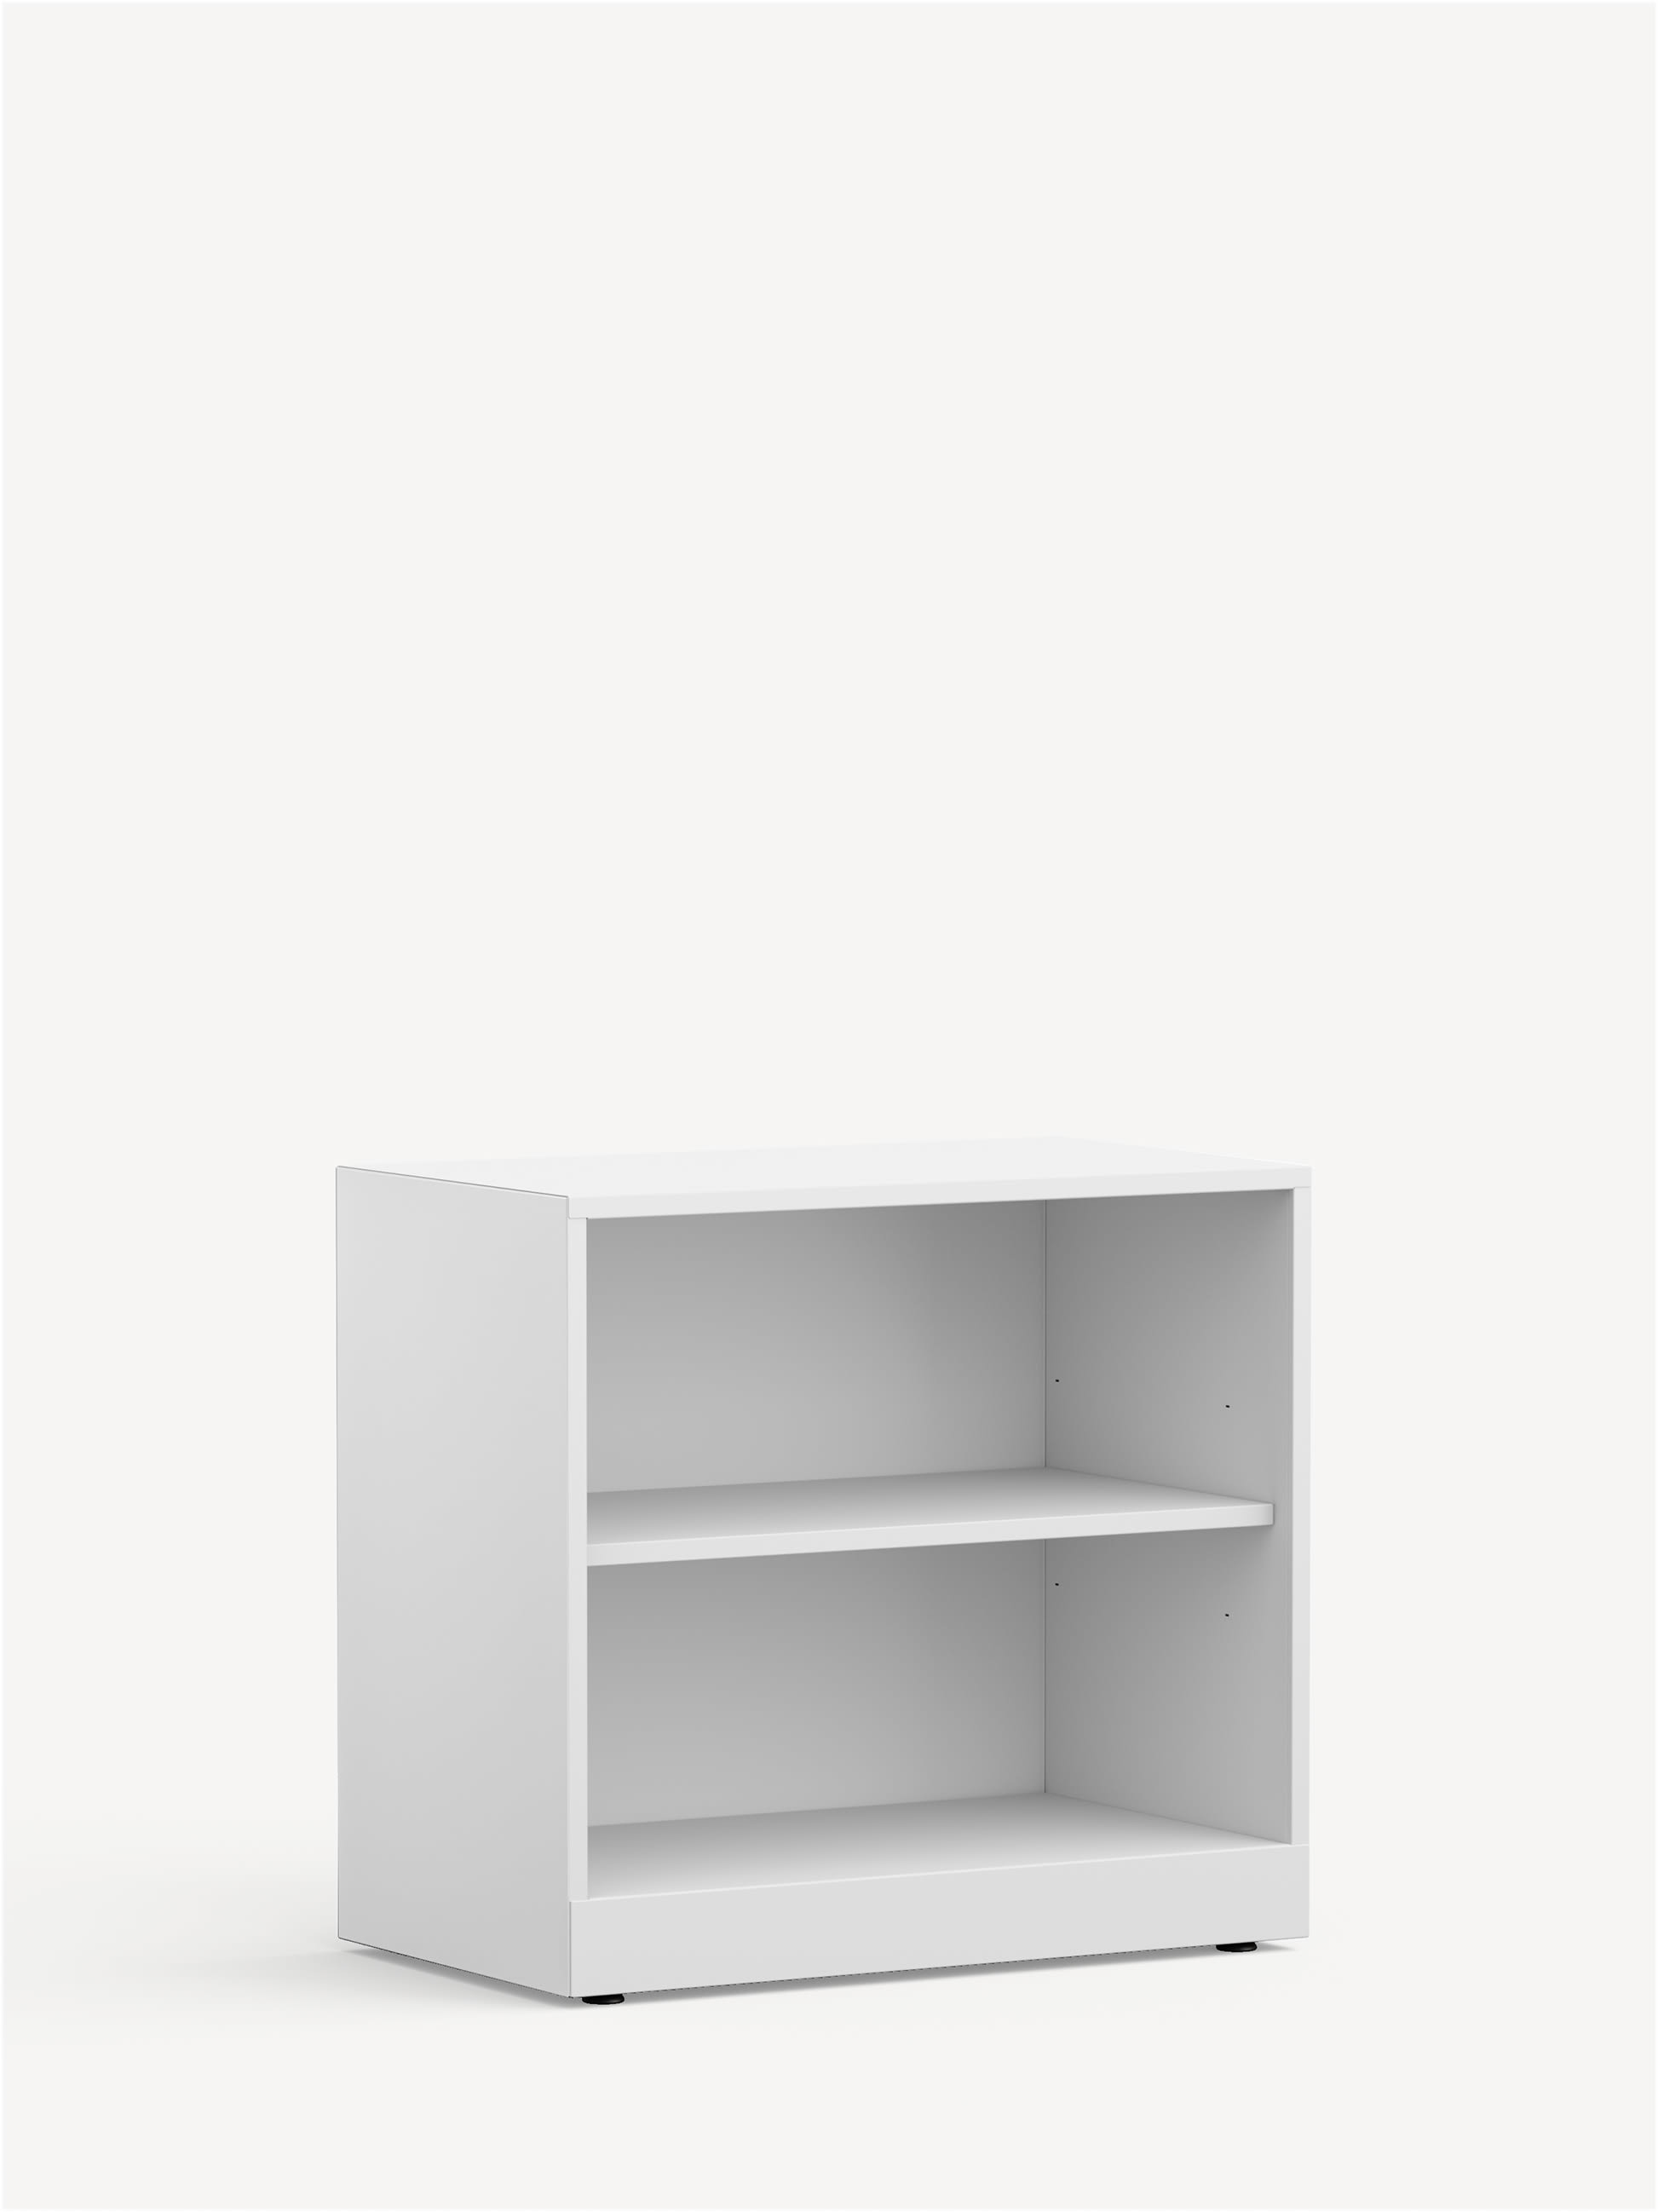 Align Bookcase in white with a flushed plinth base and one metal shelf.